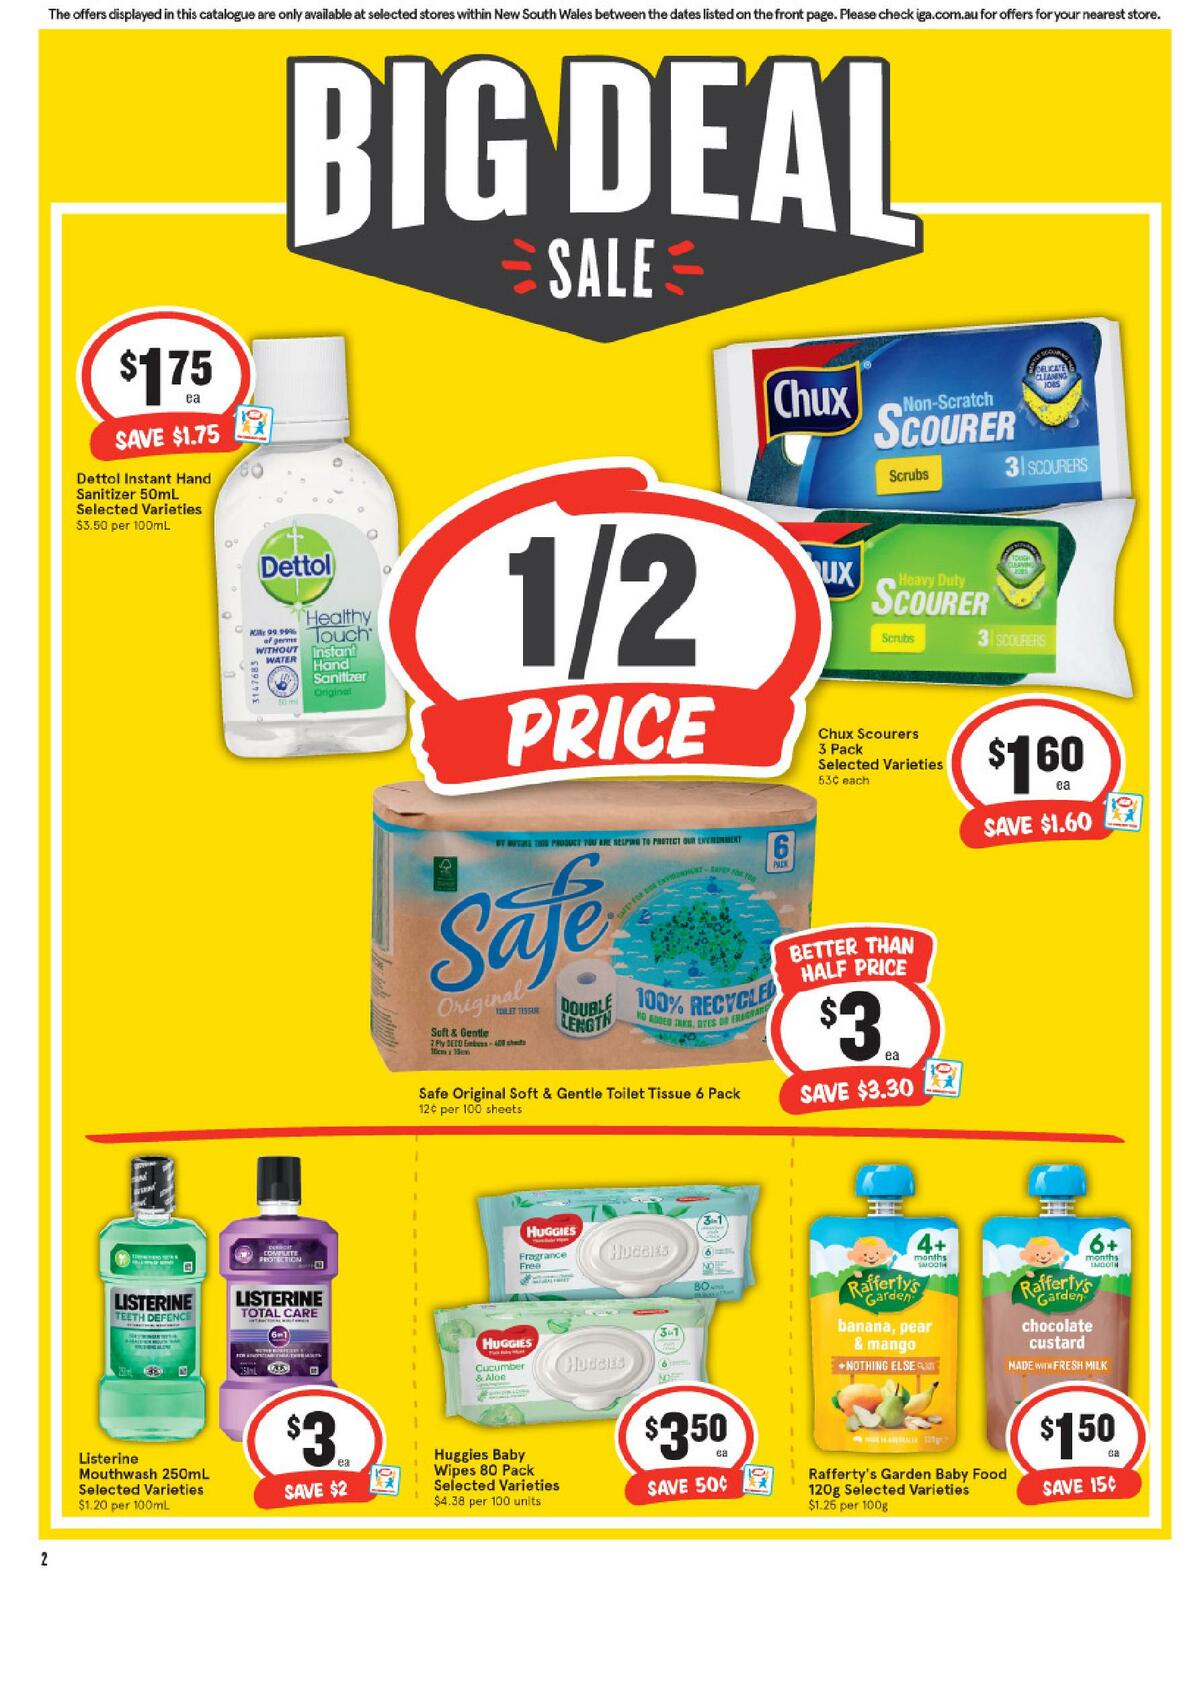 IGA Catalogues from 28 July